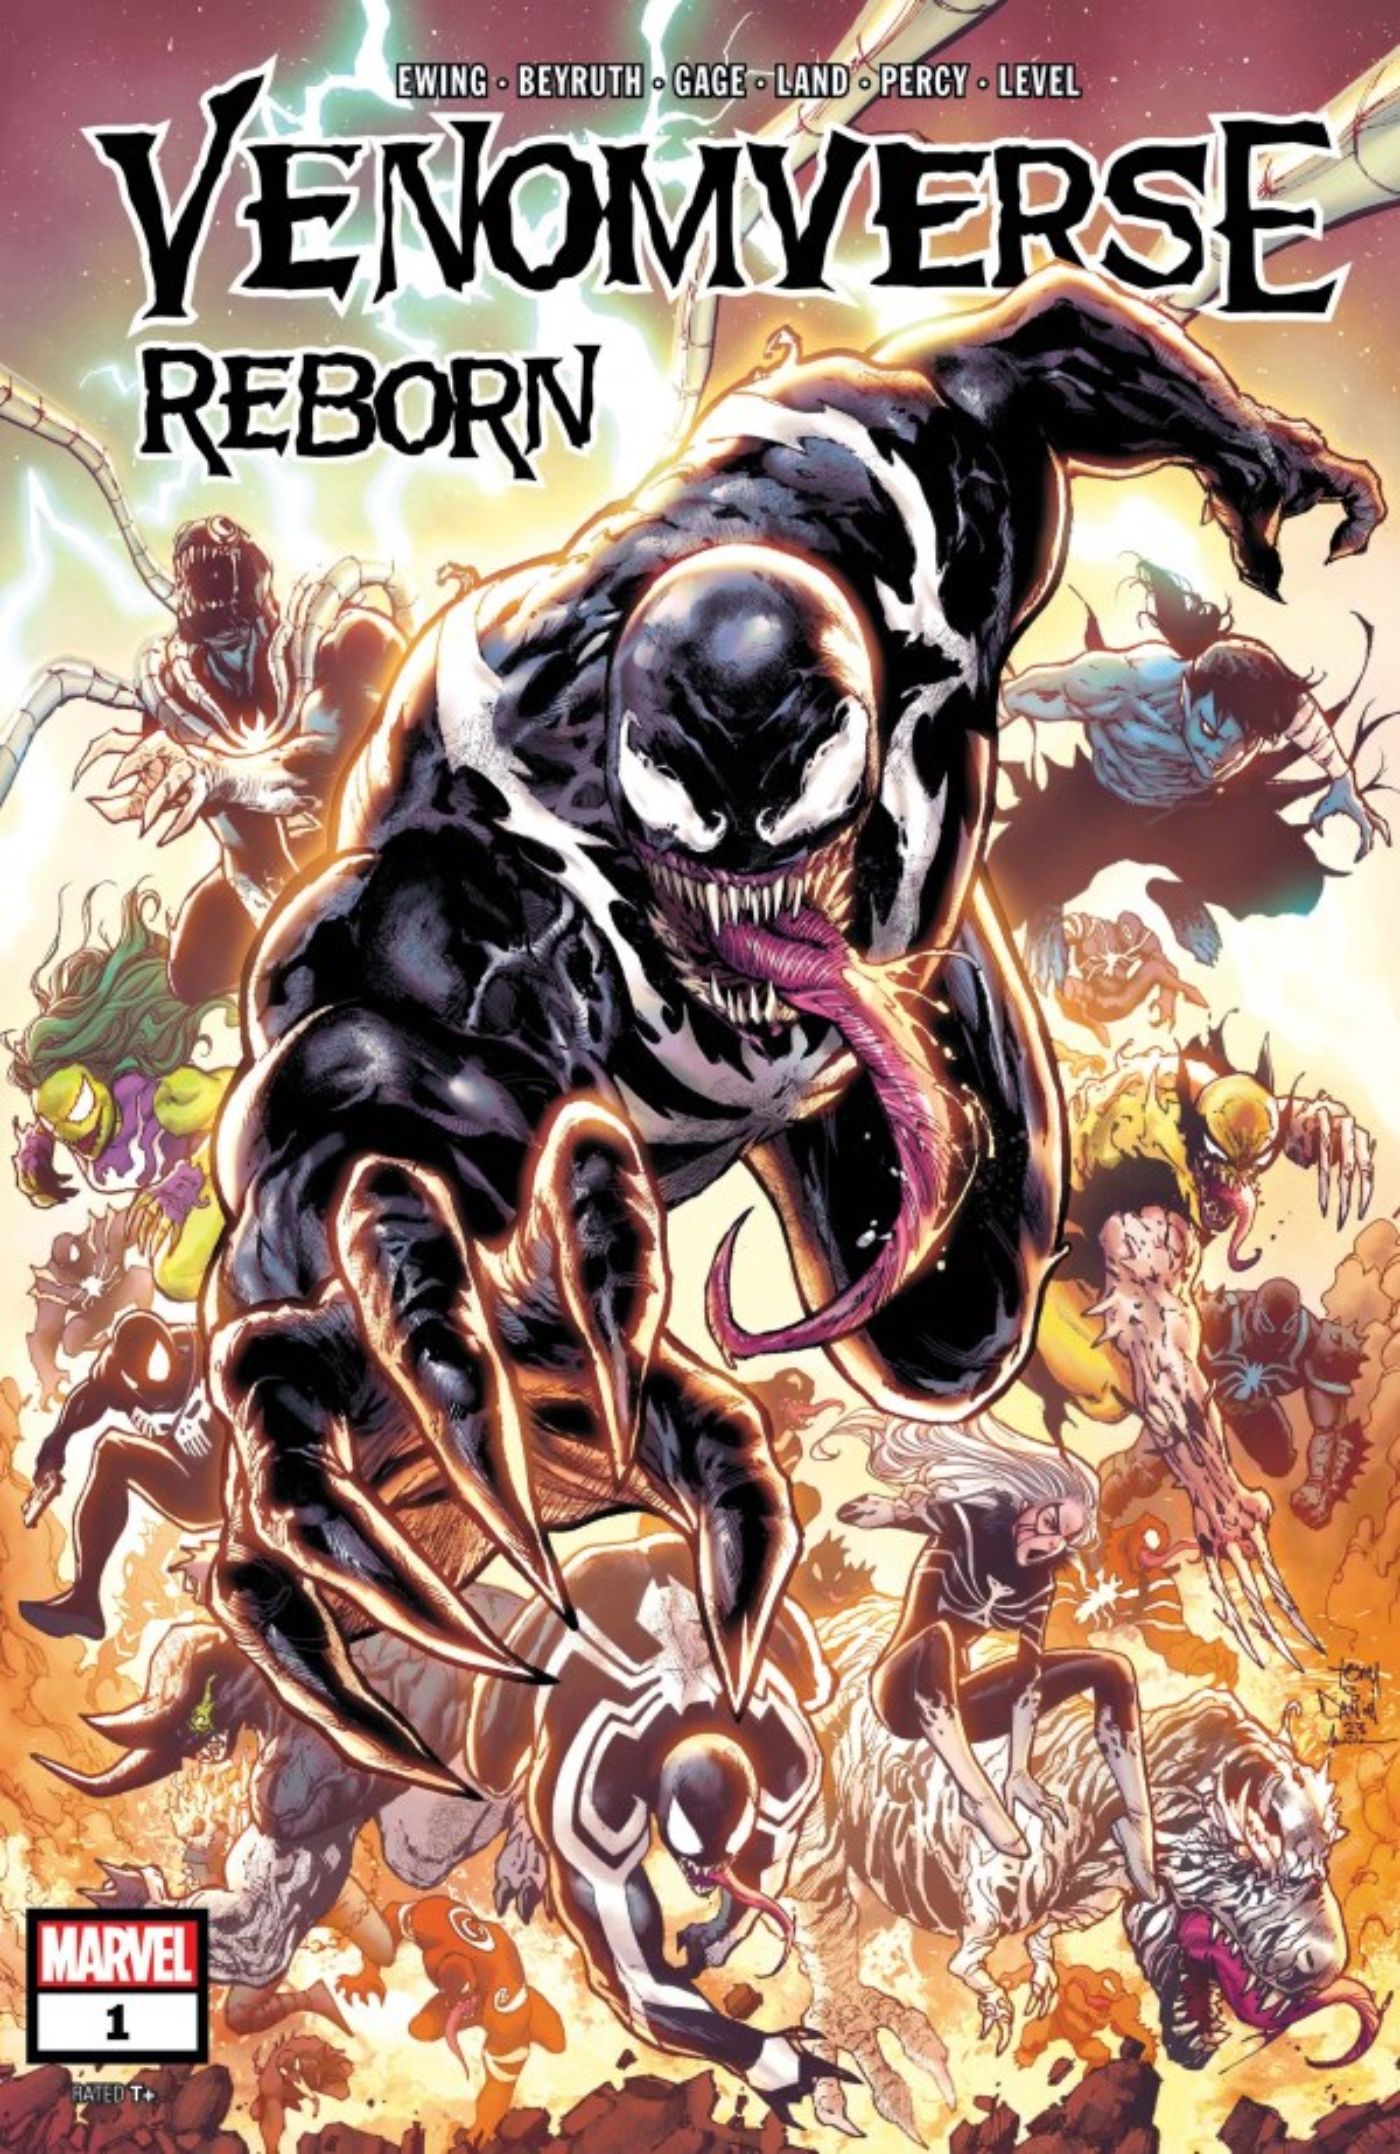 Venomverse: Reborn #1 cover featuring different Venoms from across the multiverse.